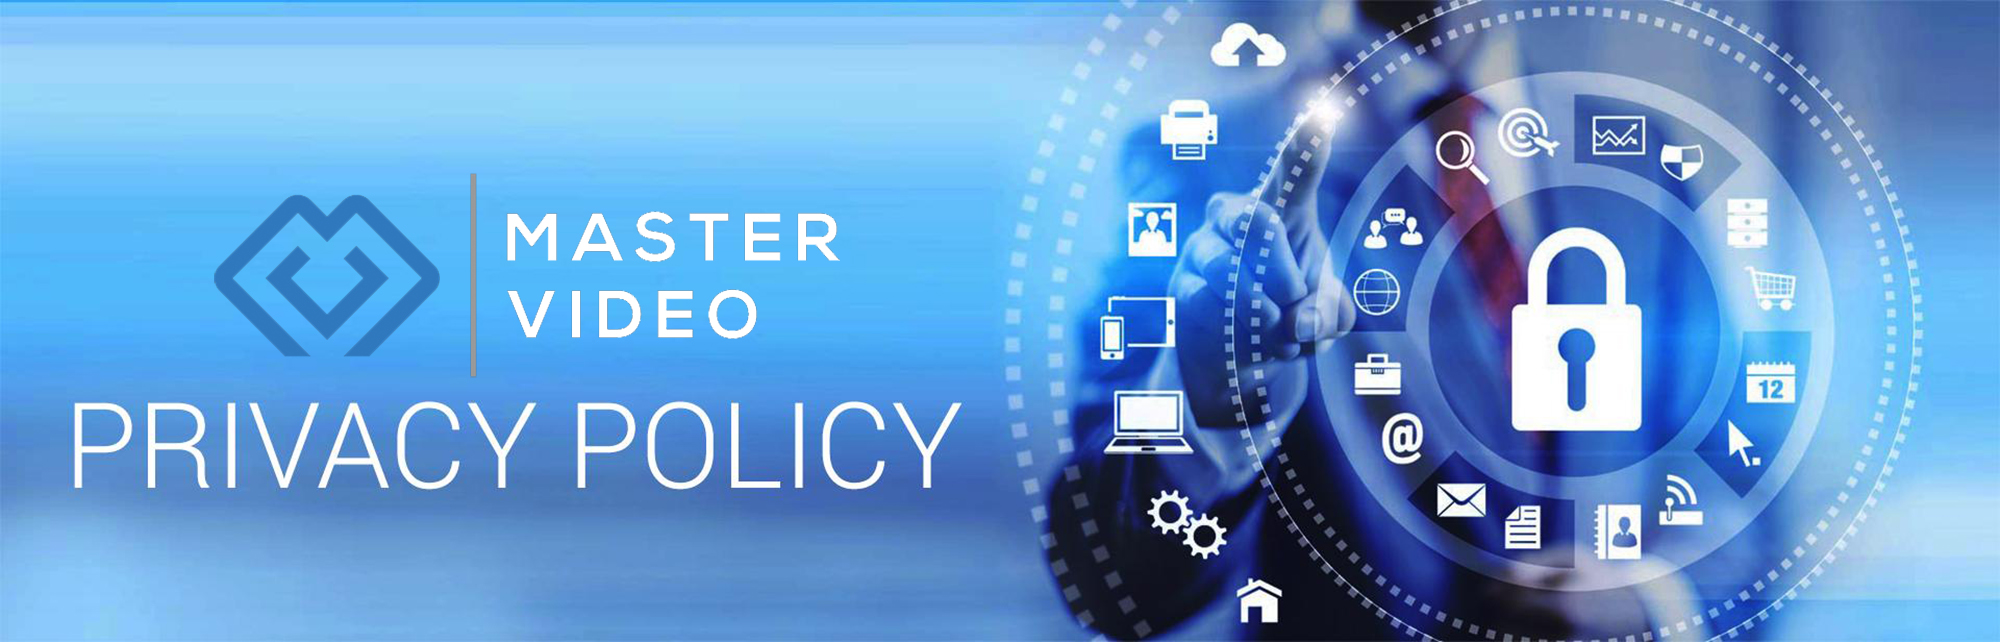 Master Video Privacy Policy